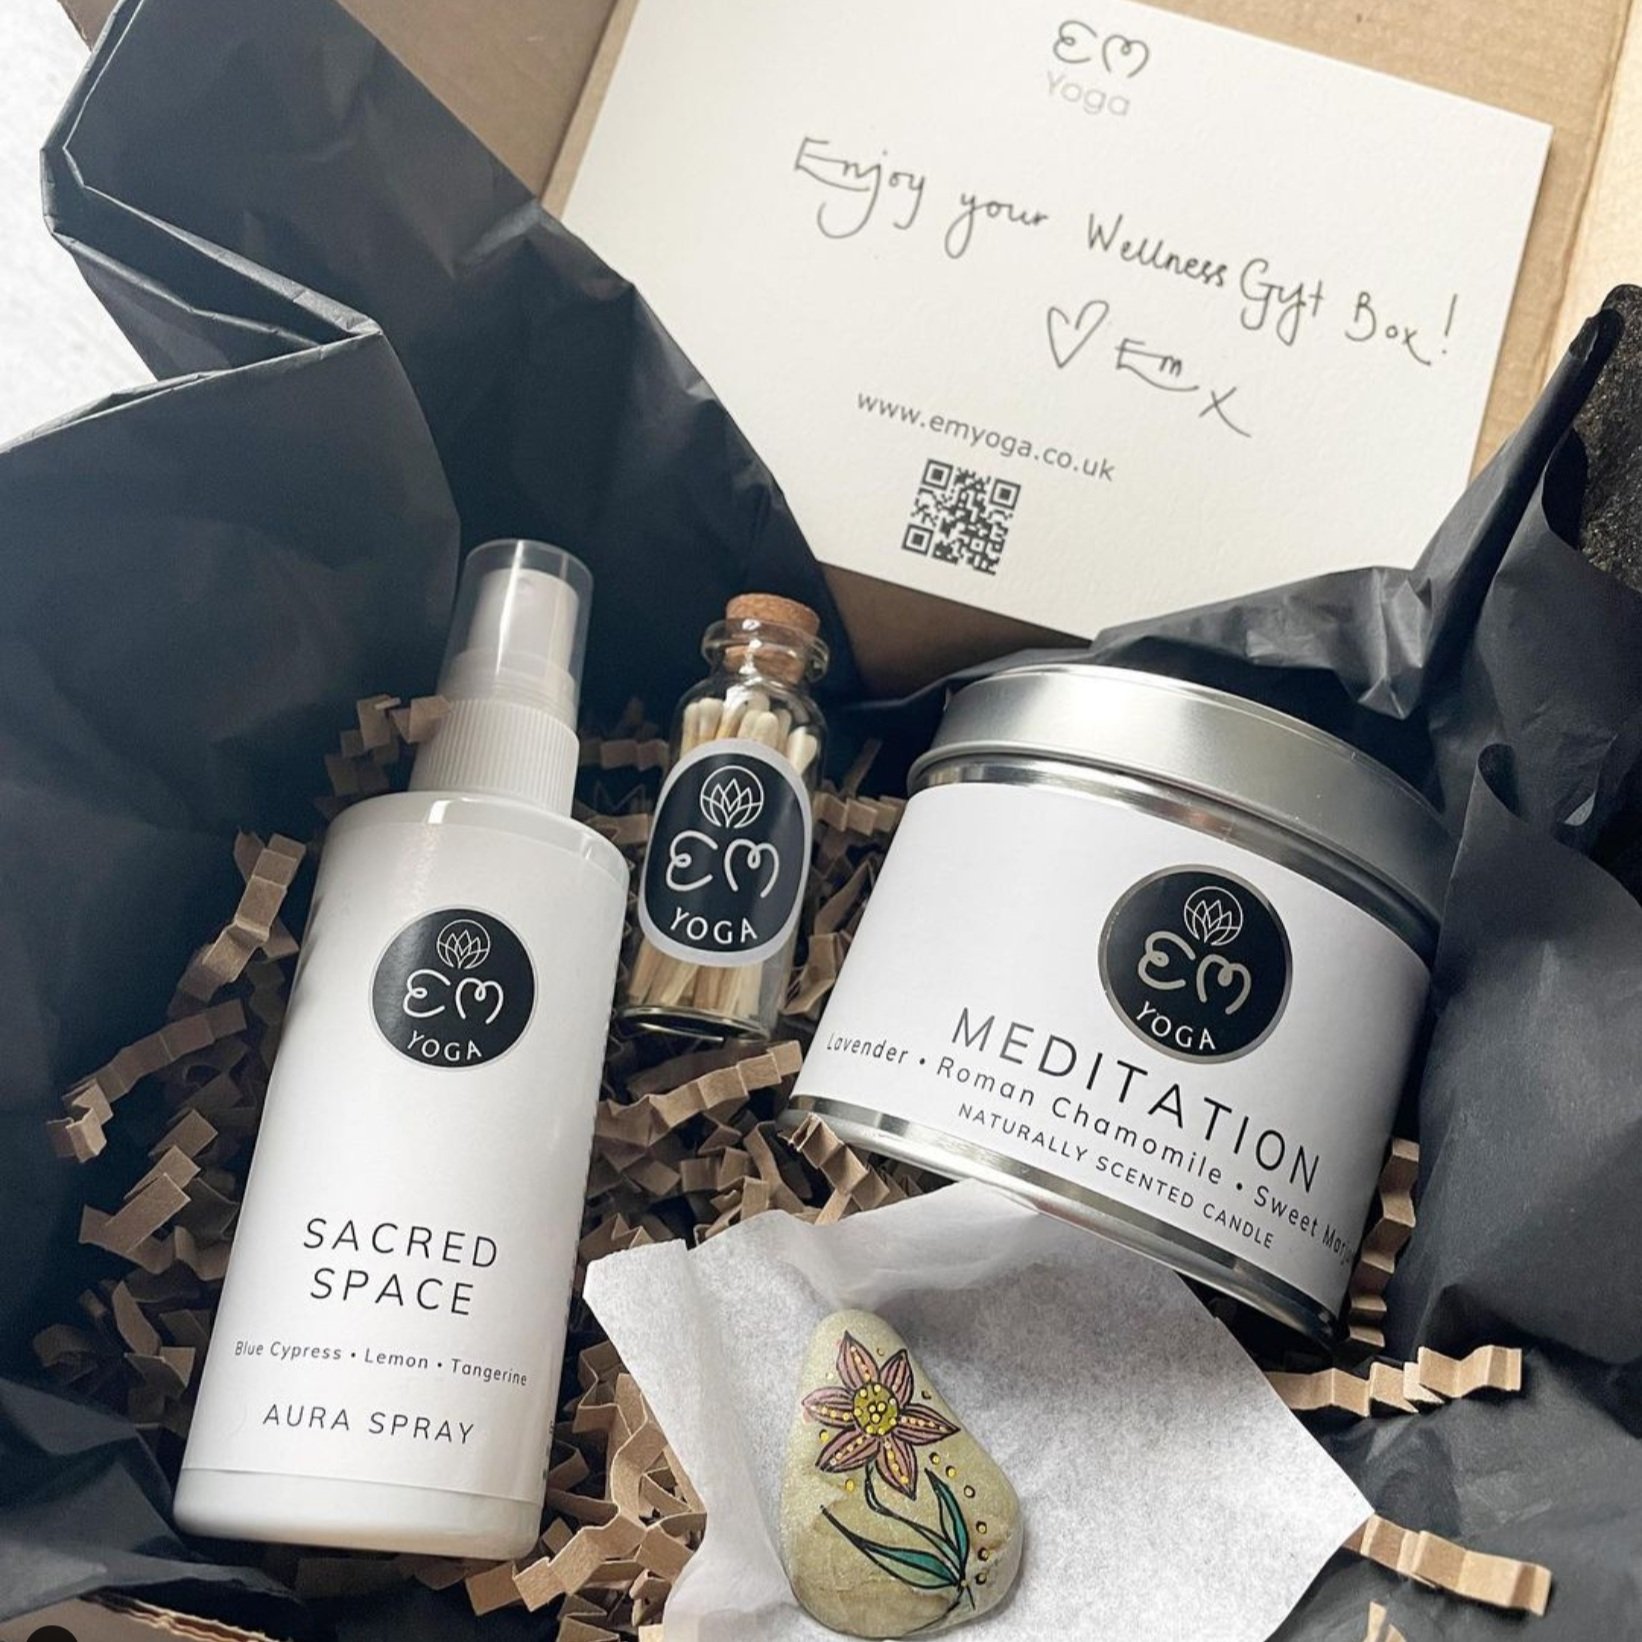 Em's wellbeing product line